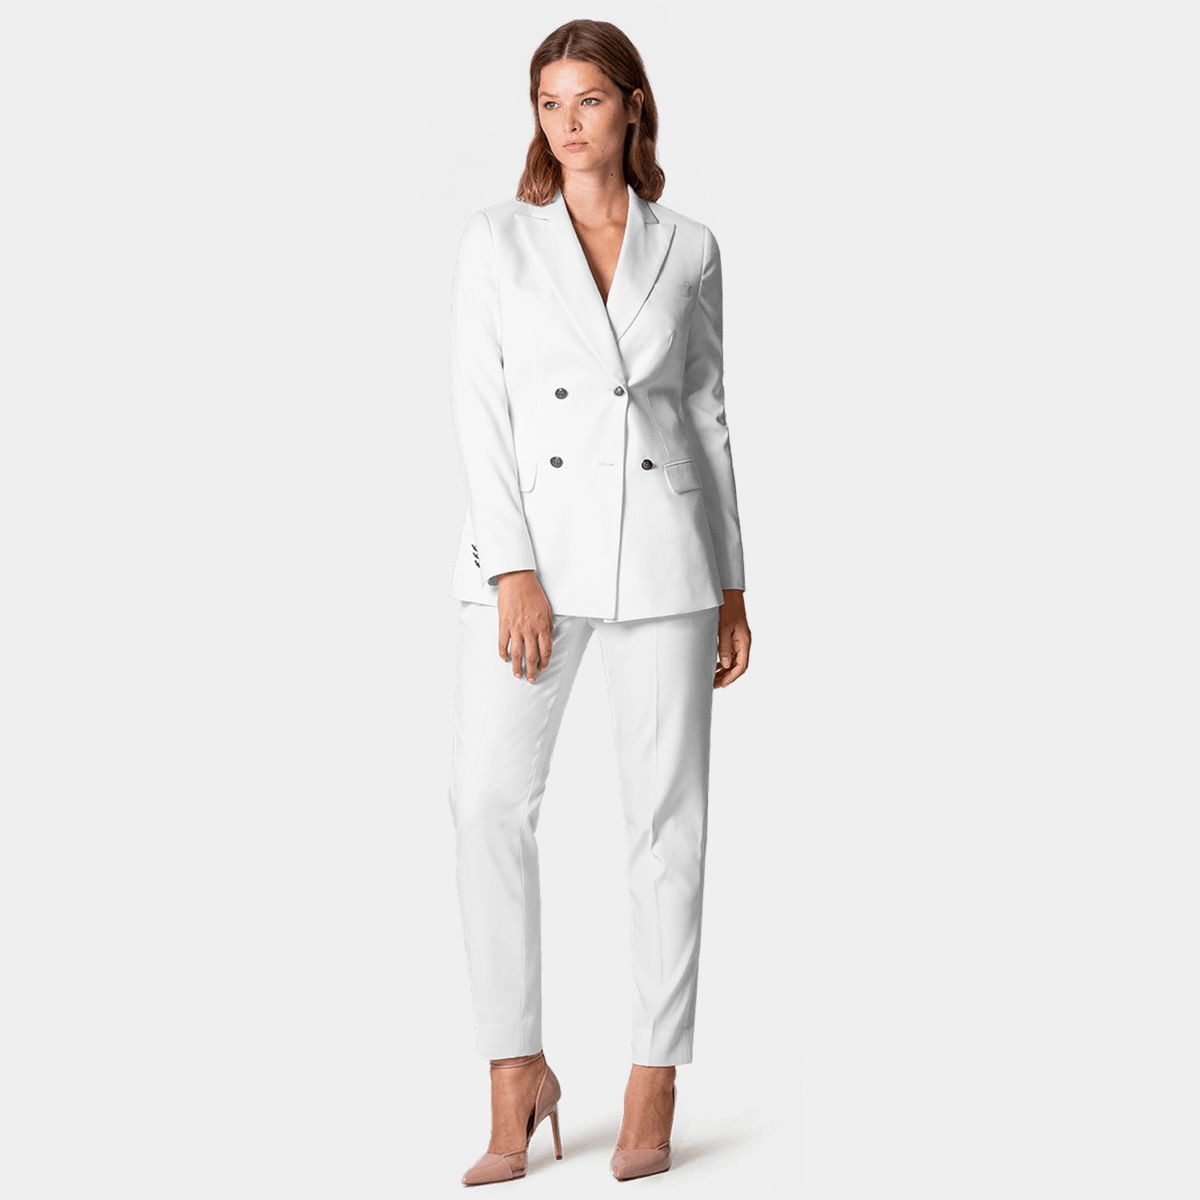 OL Womens White Summer Suit Set With Blazer Jacket, Next Ladies Trouser  Suits, And Vest Style 200923 From Dou04, $82.27 | DHgate.Com